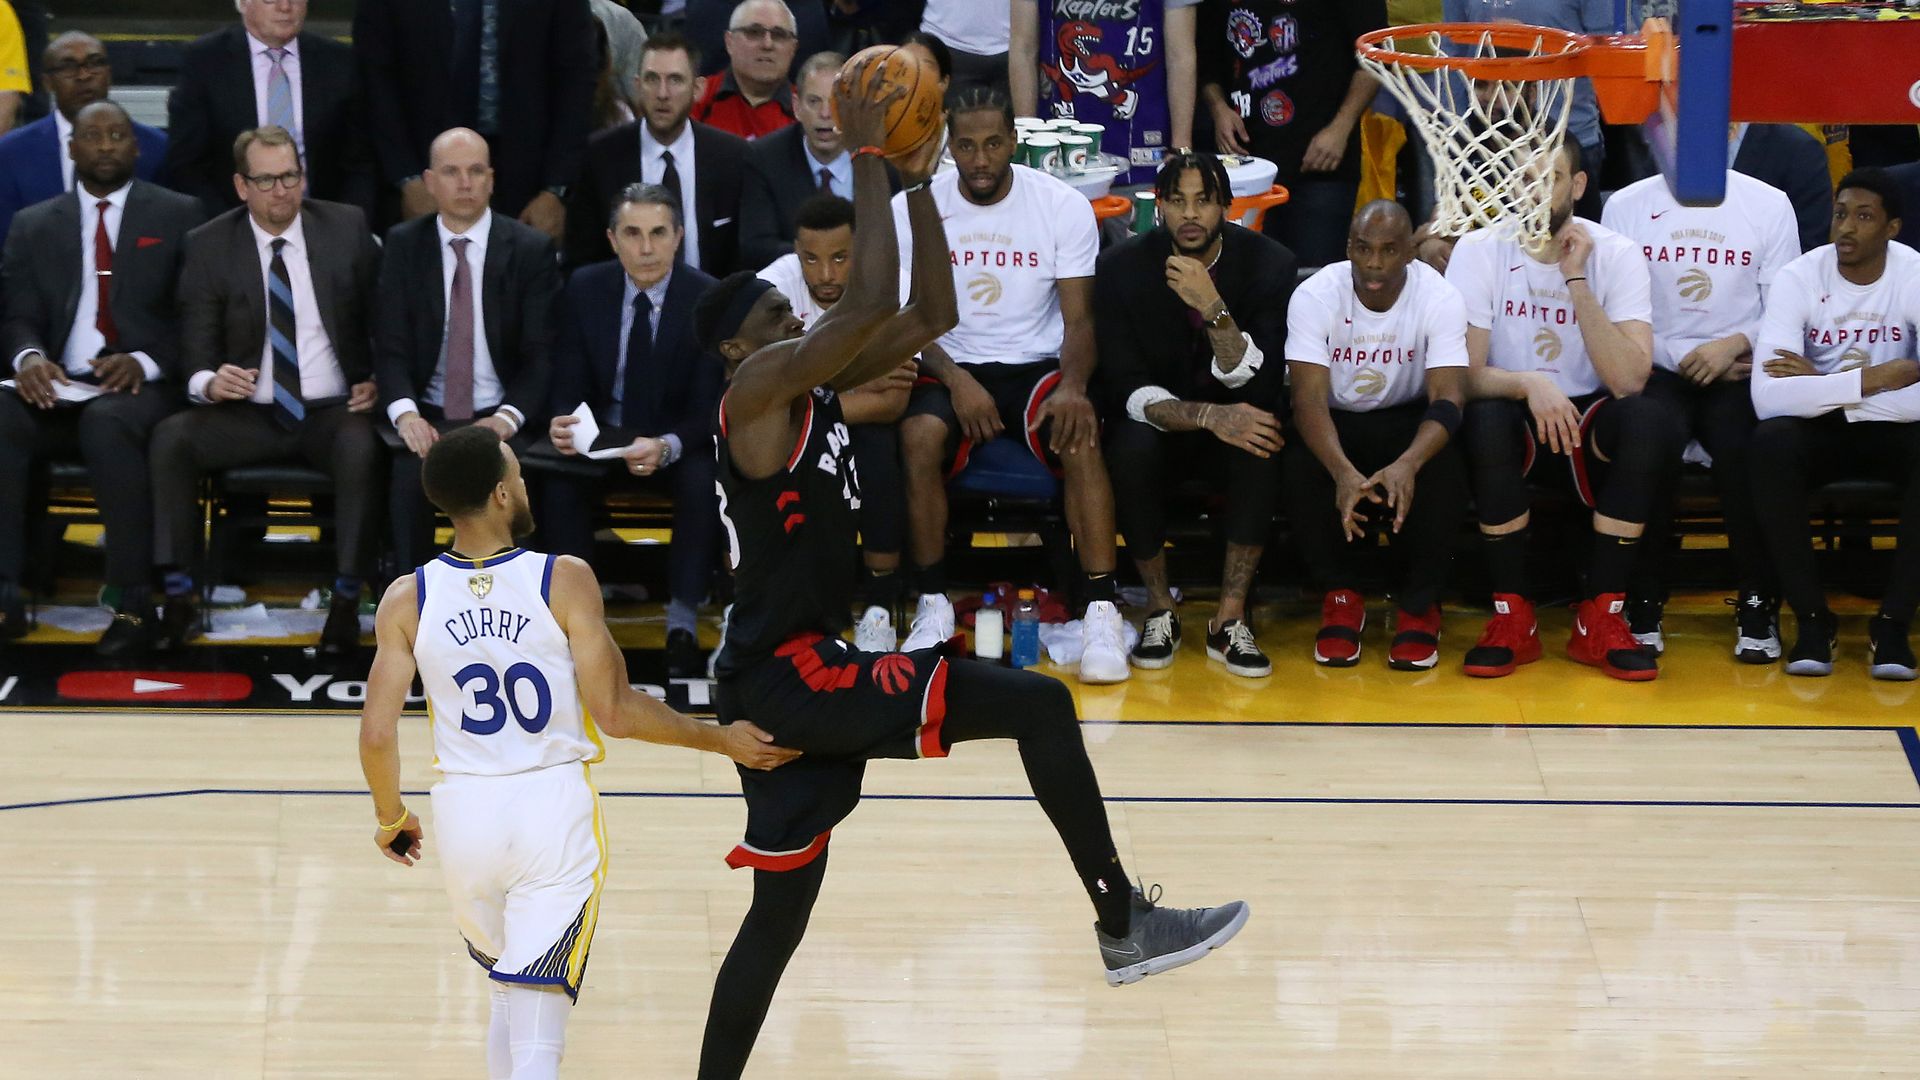 In this image, one player dunks a ball while another stands nearby.